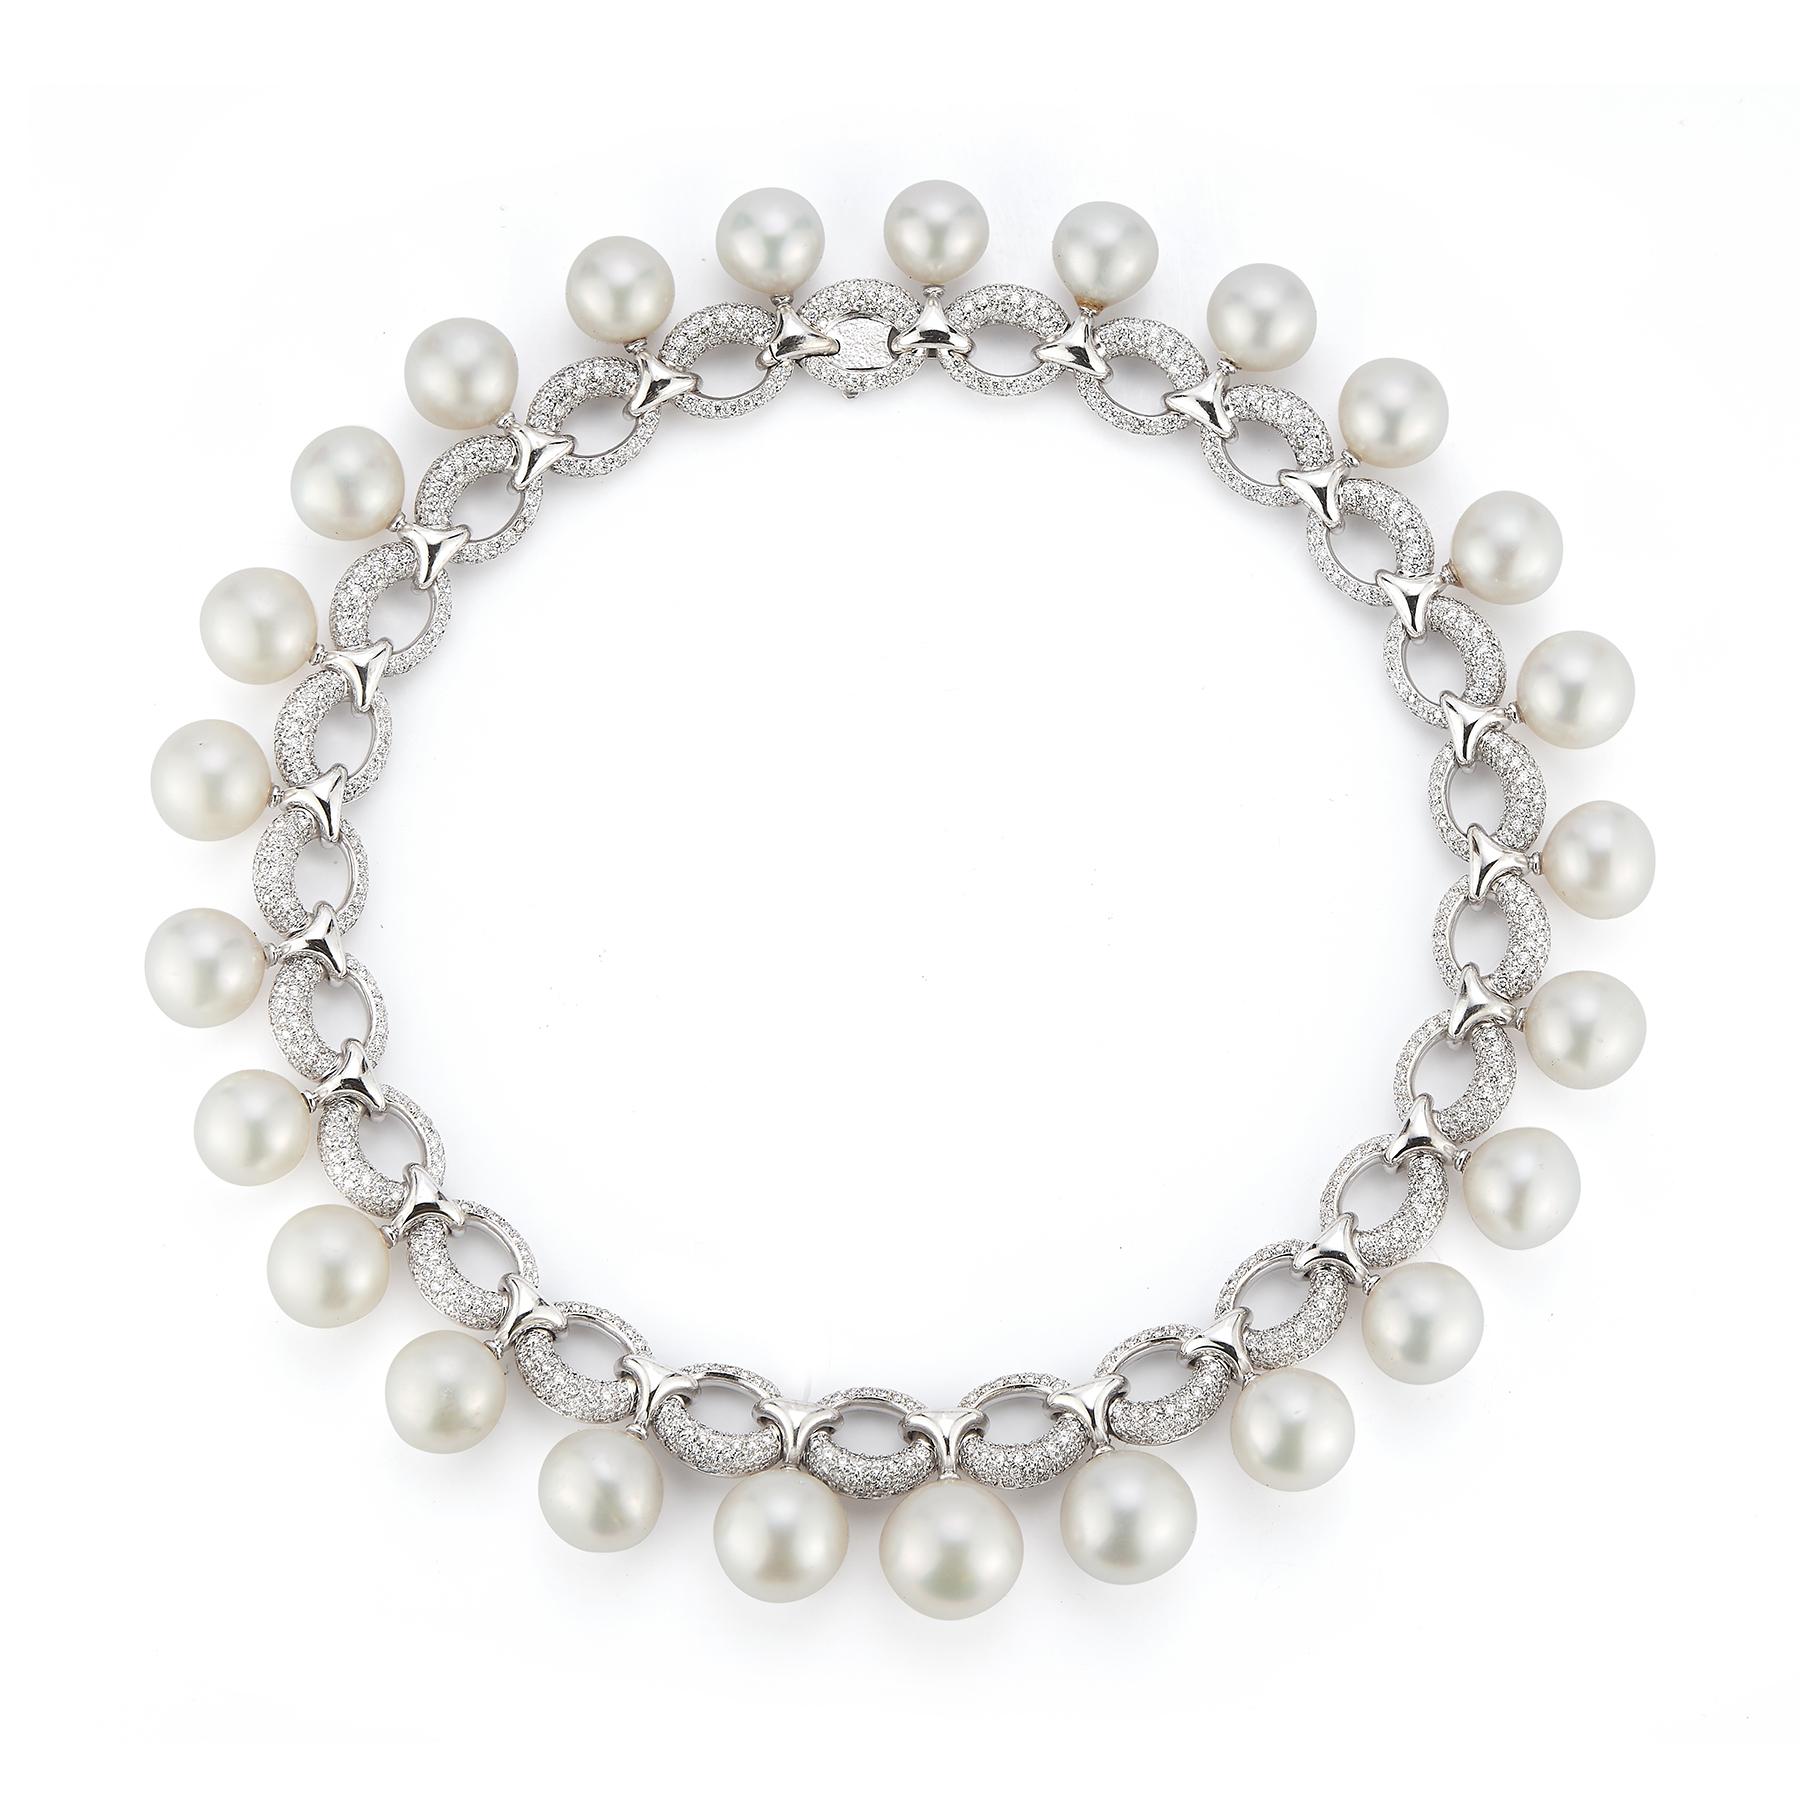 Important Cultured Pearl and Diamond Link Necklace

25 very fine large size cultured pearls hanging from pave diamond links all set in 18K White Gold 

Measurements: 16